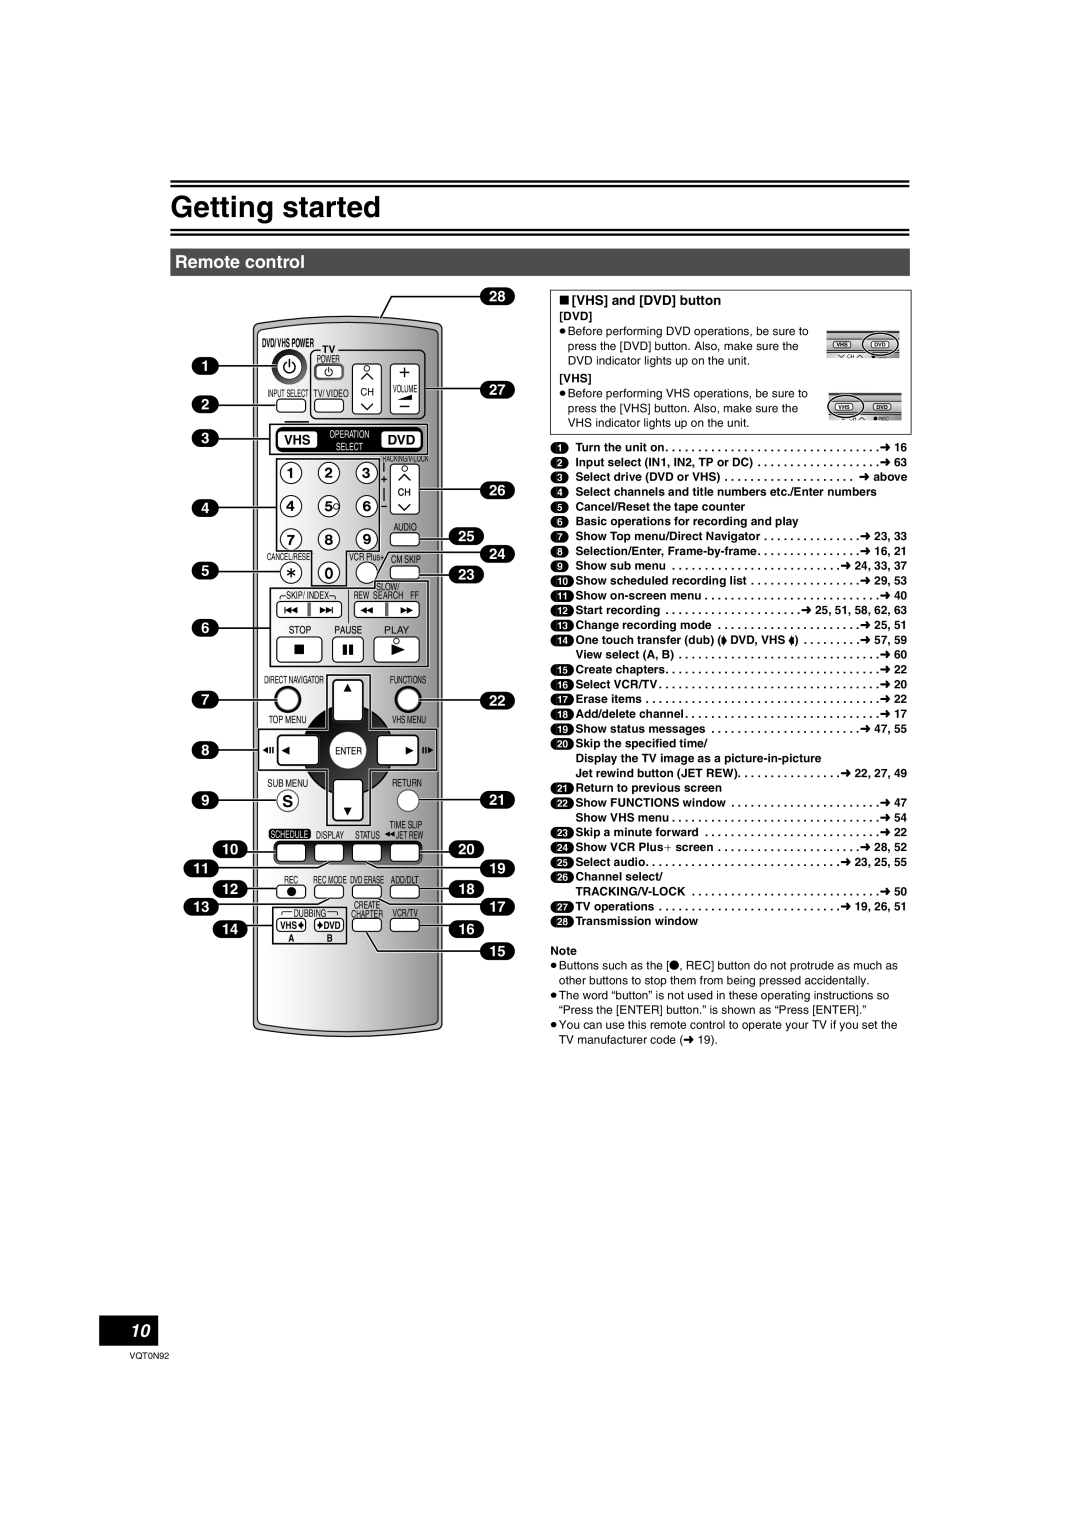 Panasonic DMR-ES30V warranty Remote control, ∫ VHS and DVD button, Getting started 